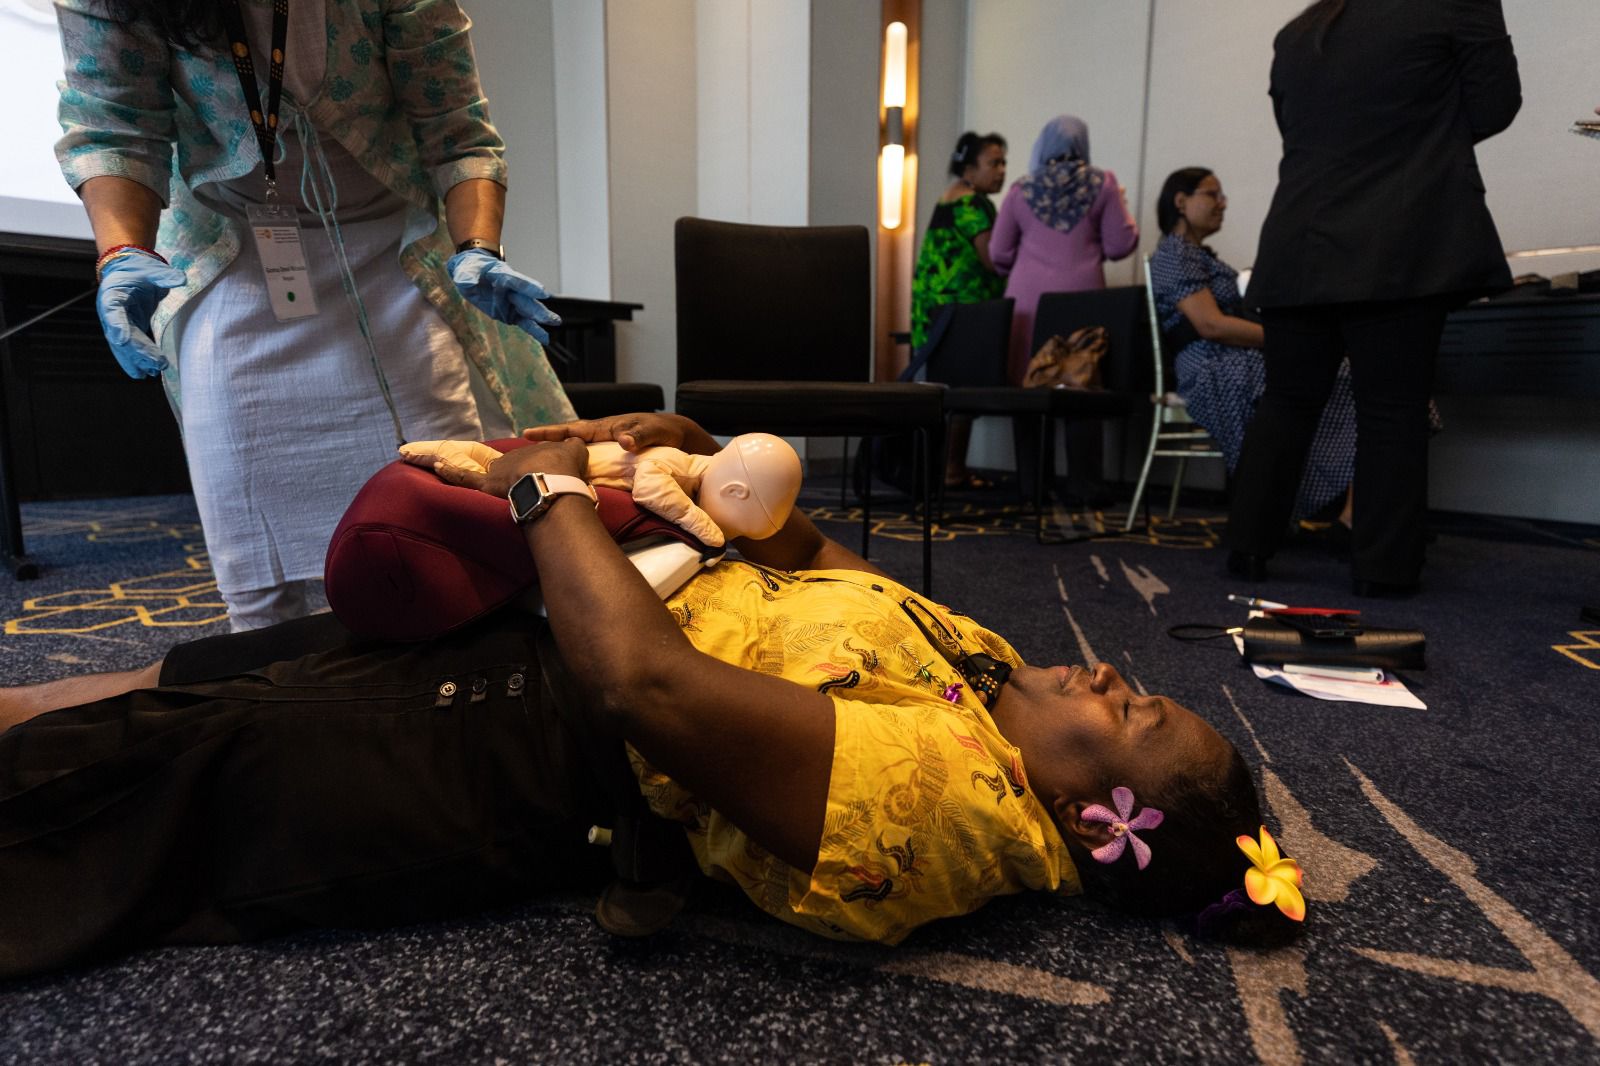 Midwifery educator Ms Cherolyn Polomon from Papua New Guinea uses a ‘Mamabirthie’, a birthing simulator which enables midwifery students to practise manoeuvres and skills for all stages of labour.